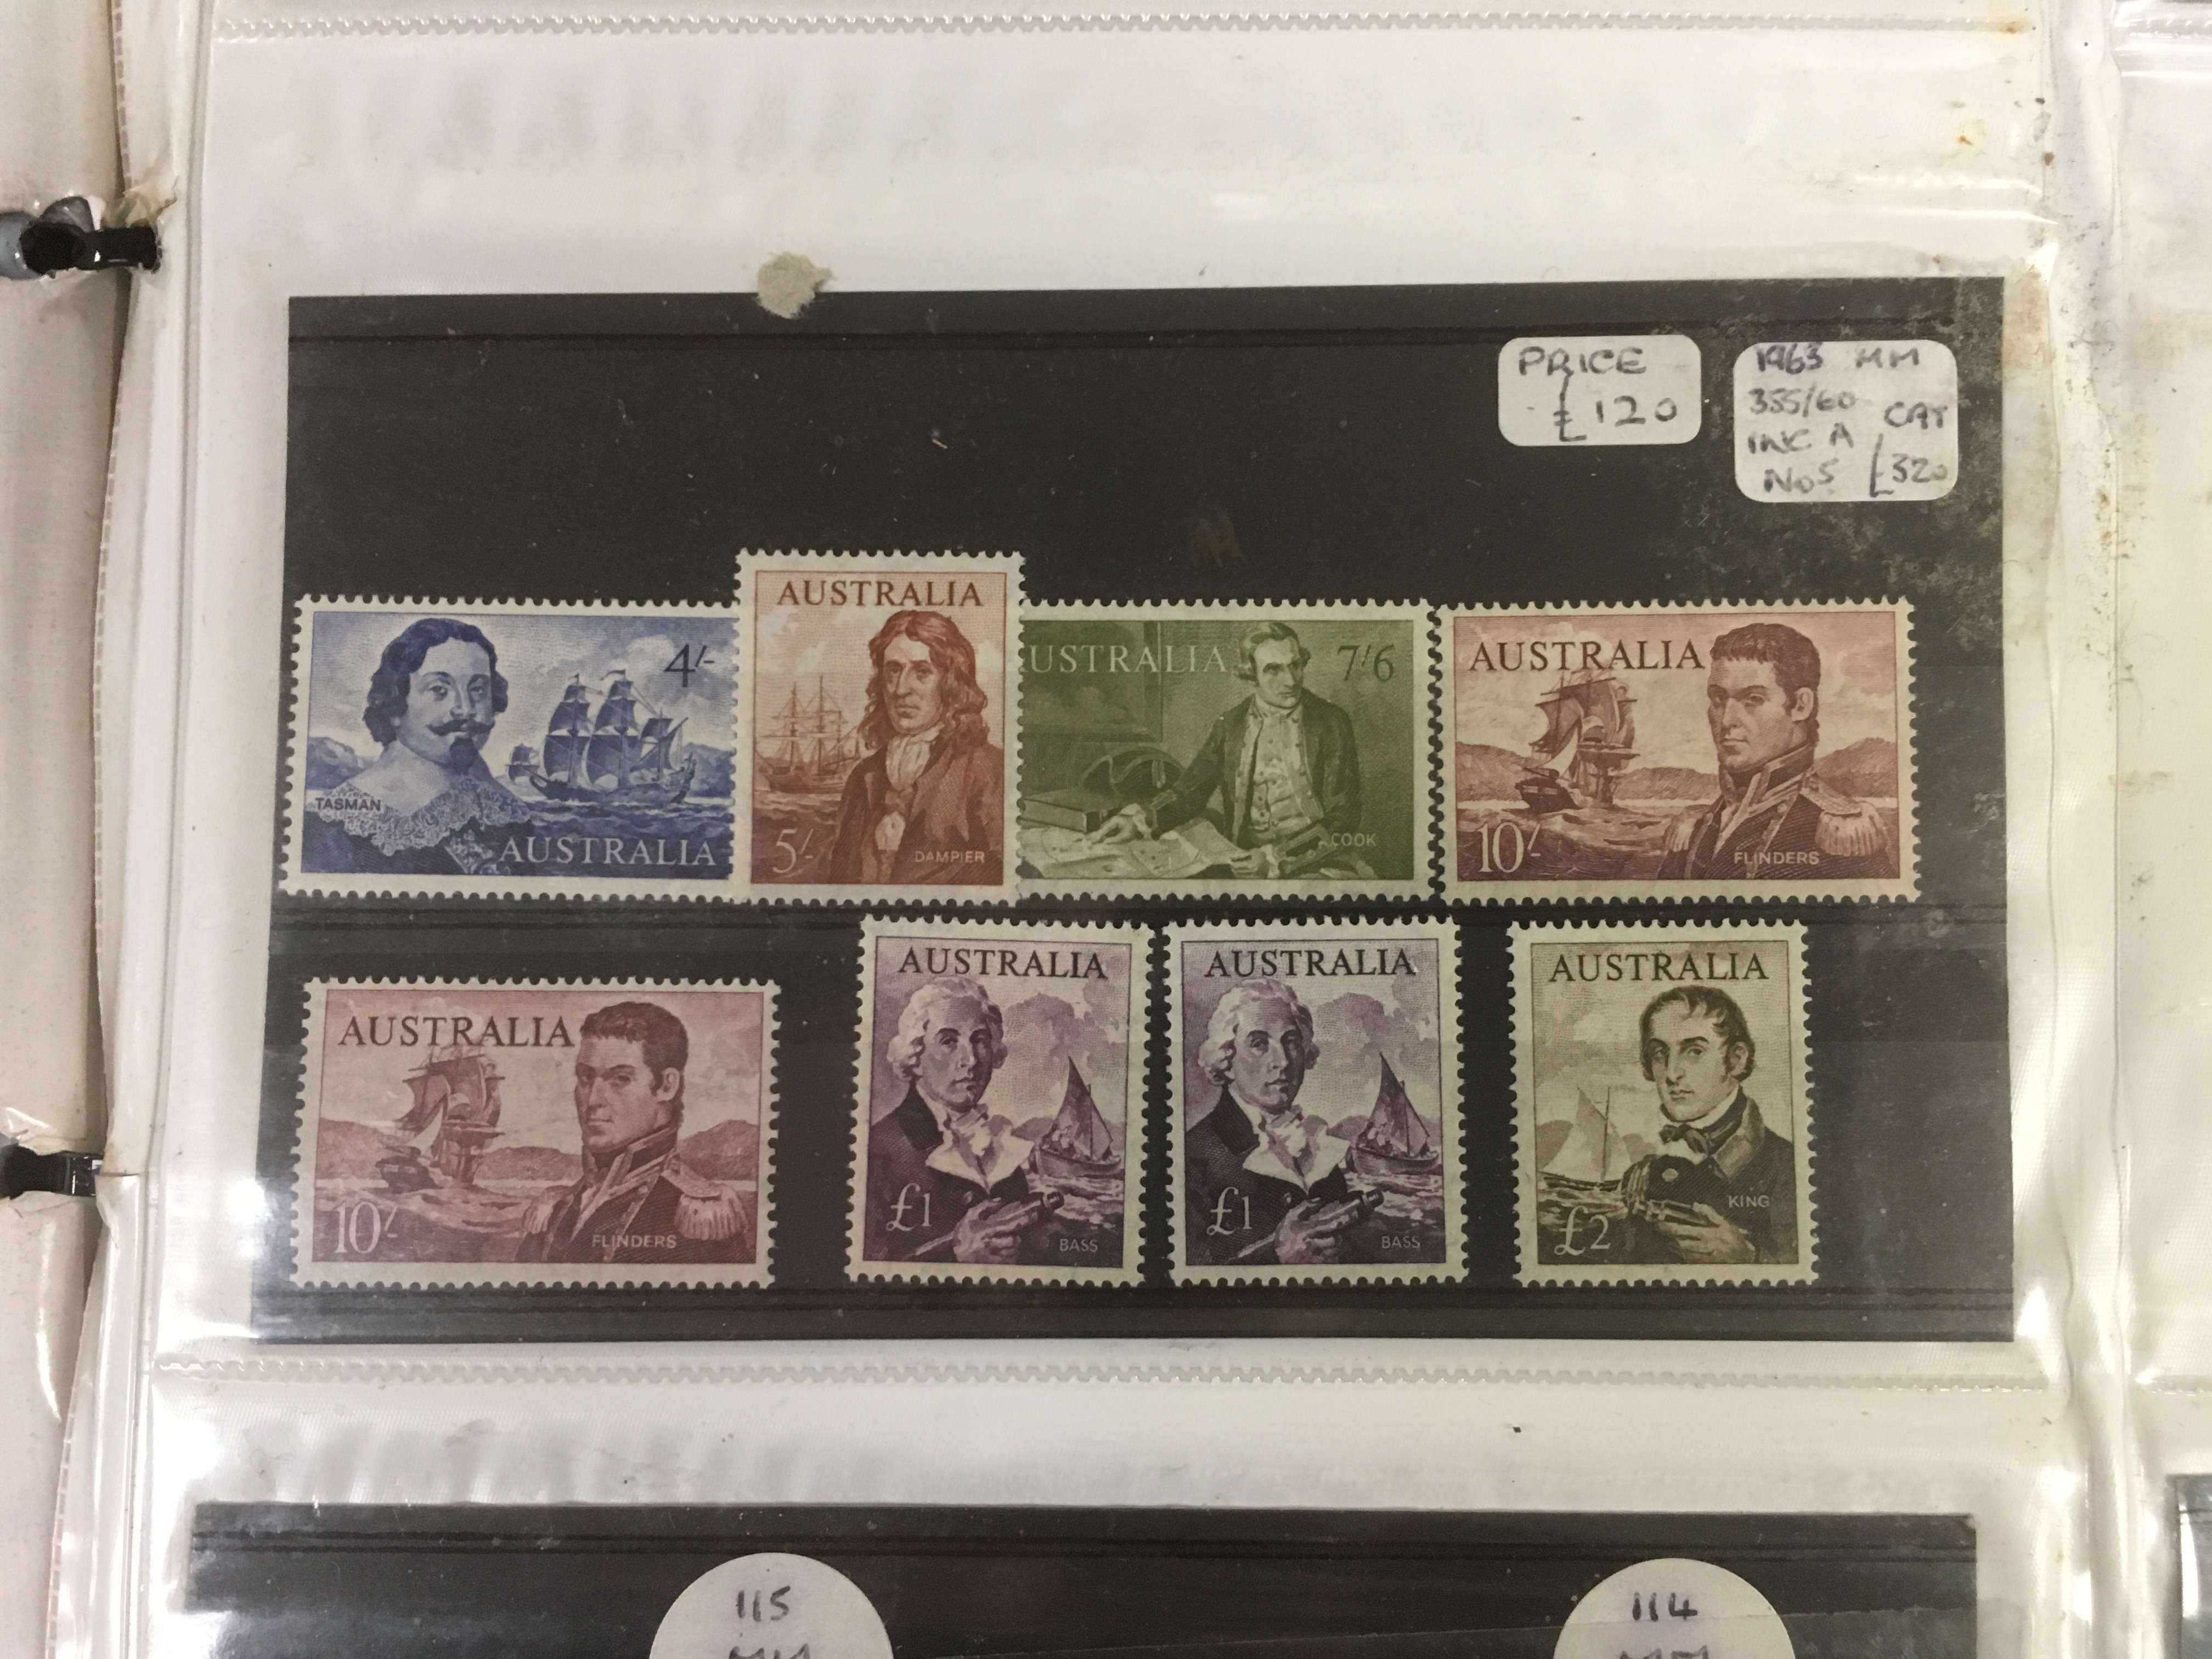 AUSTRALIA: EX DEALER'S STOCK OF SETS AND SINGLES ON PAGES, - Image 2 of 10